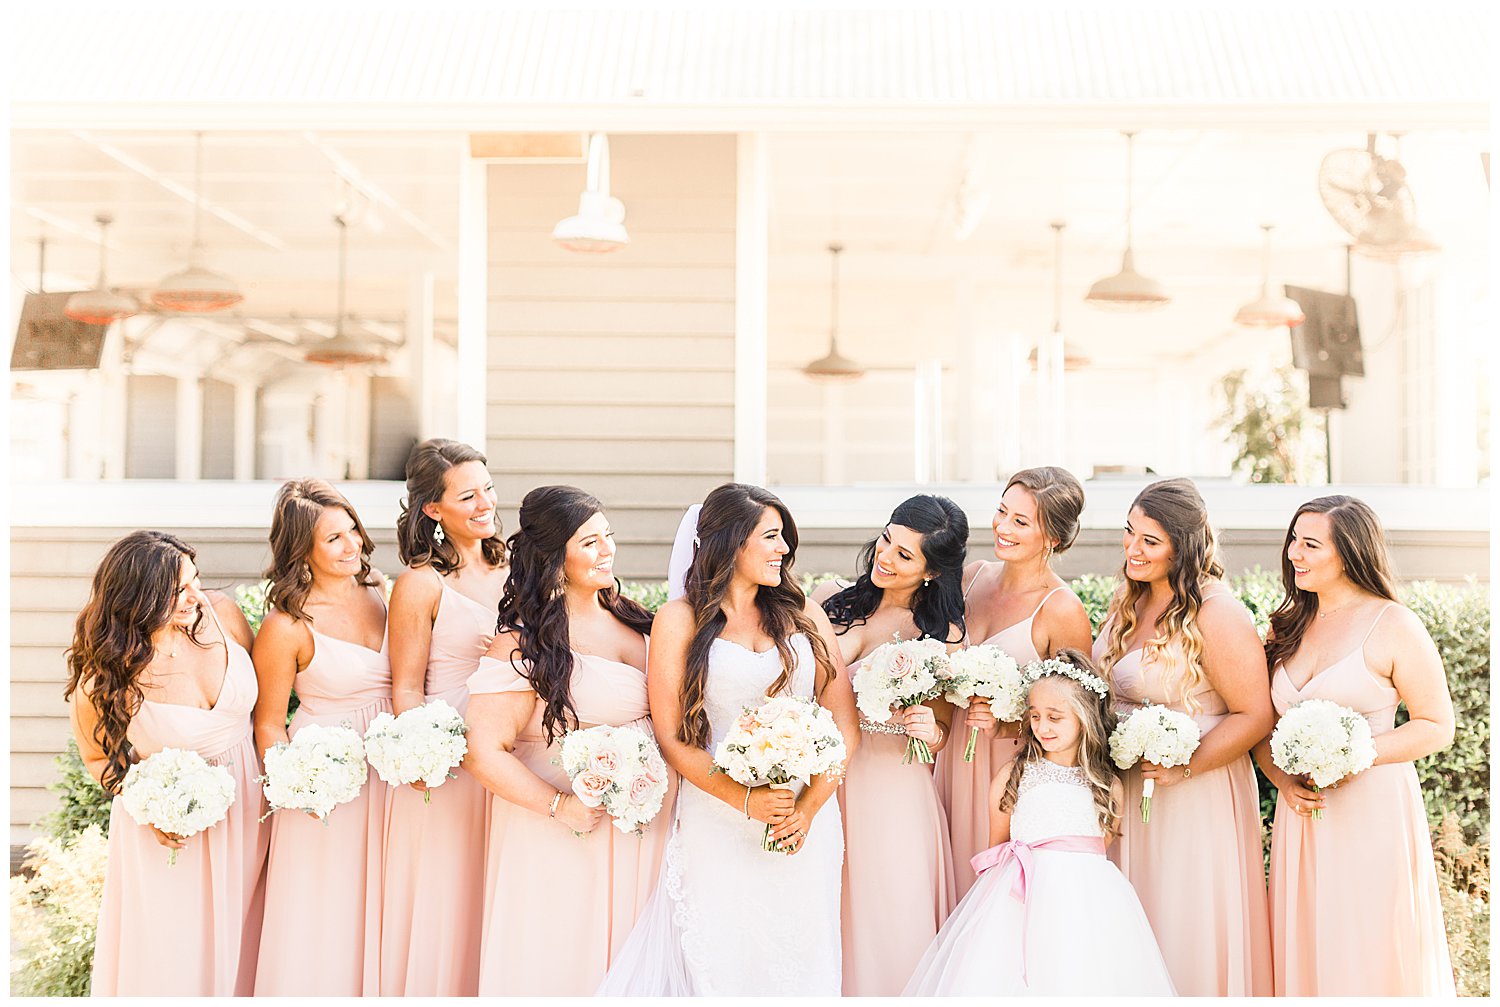 Bridesmaids and bride in blush and white